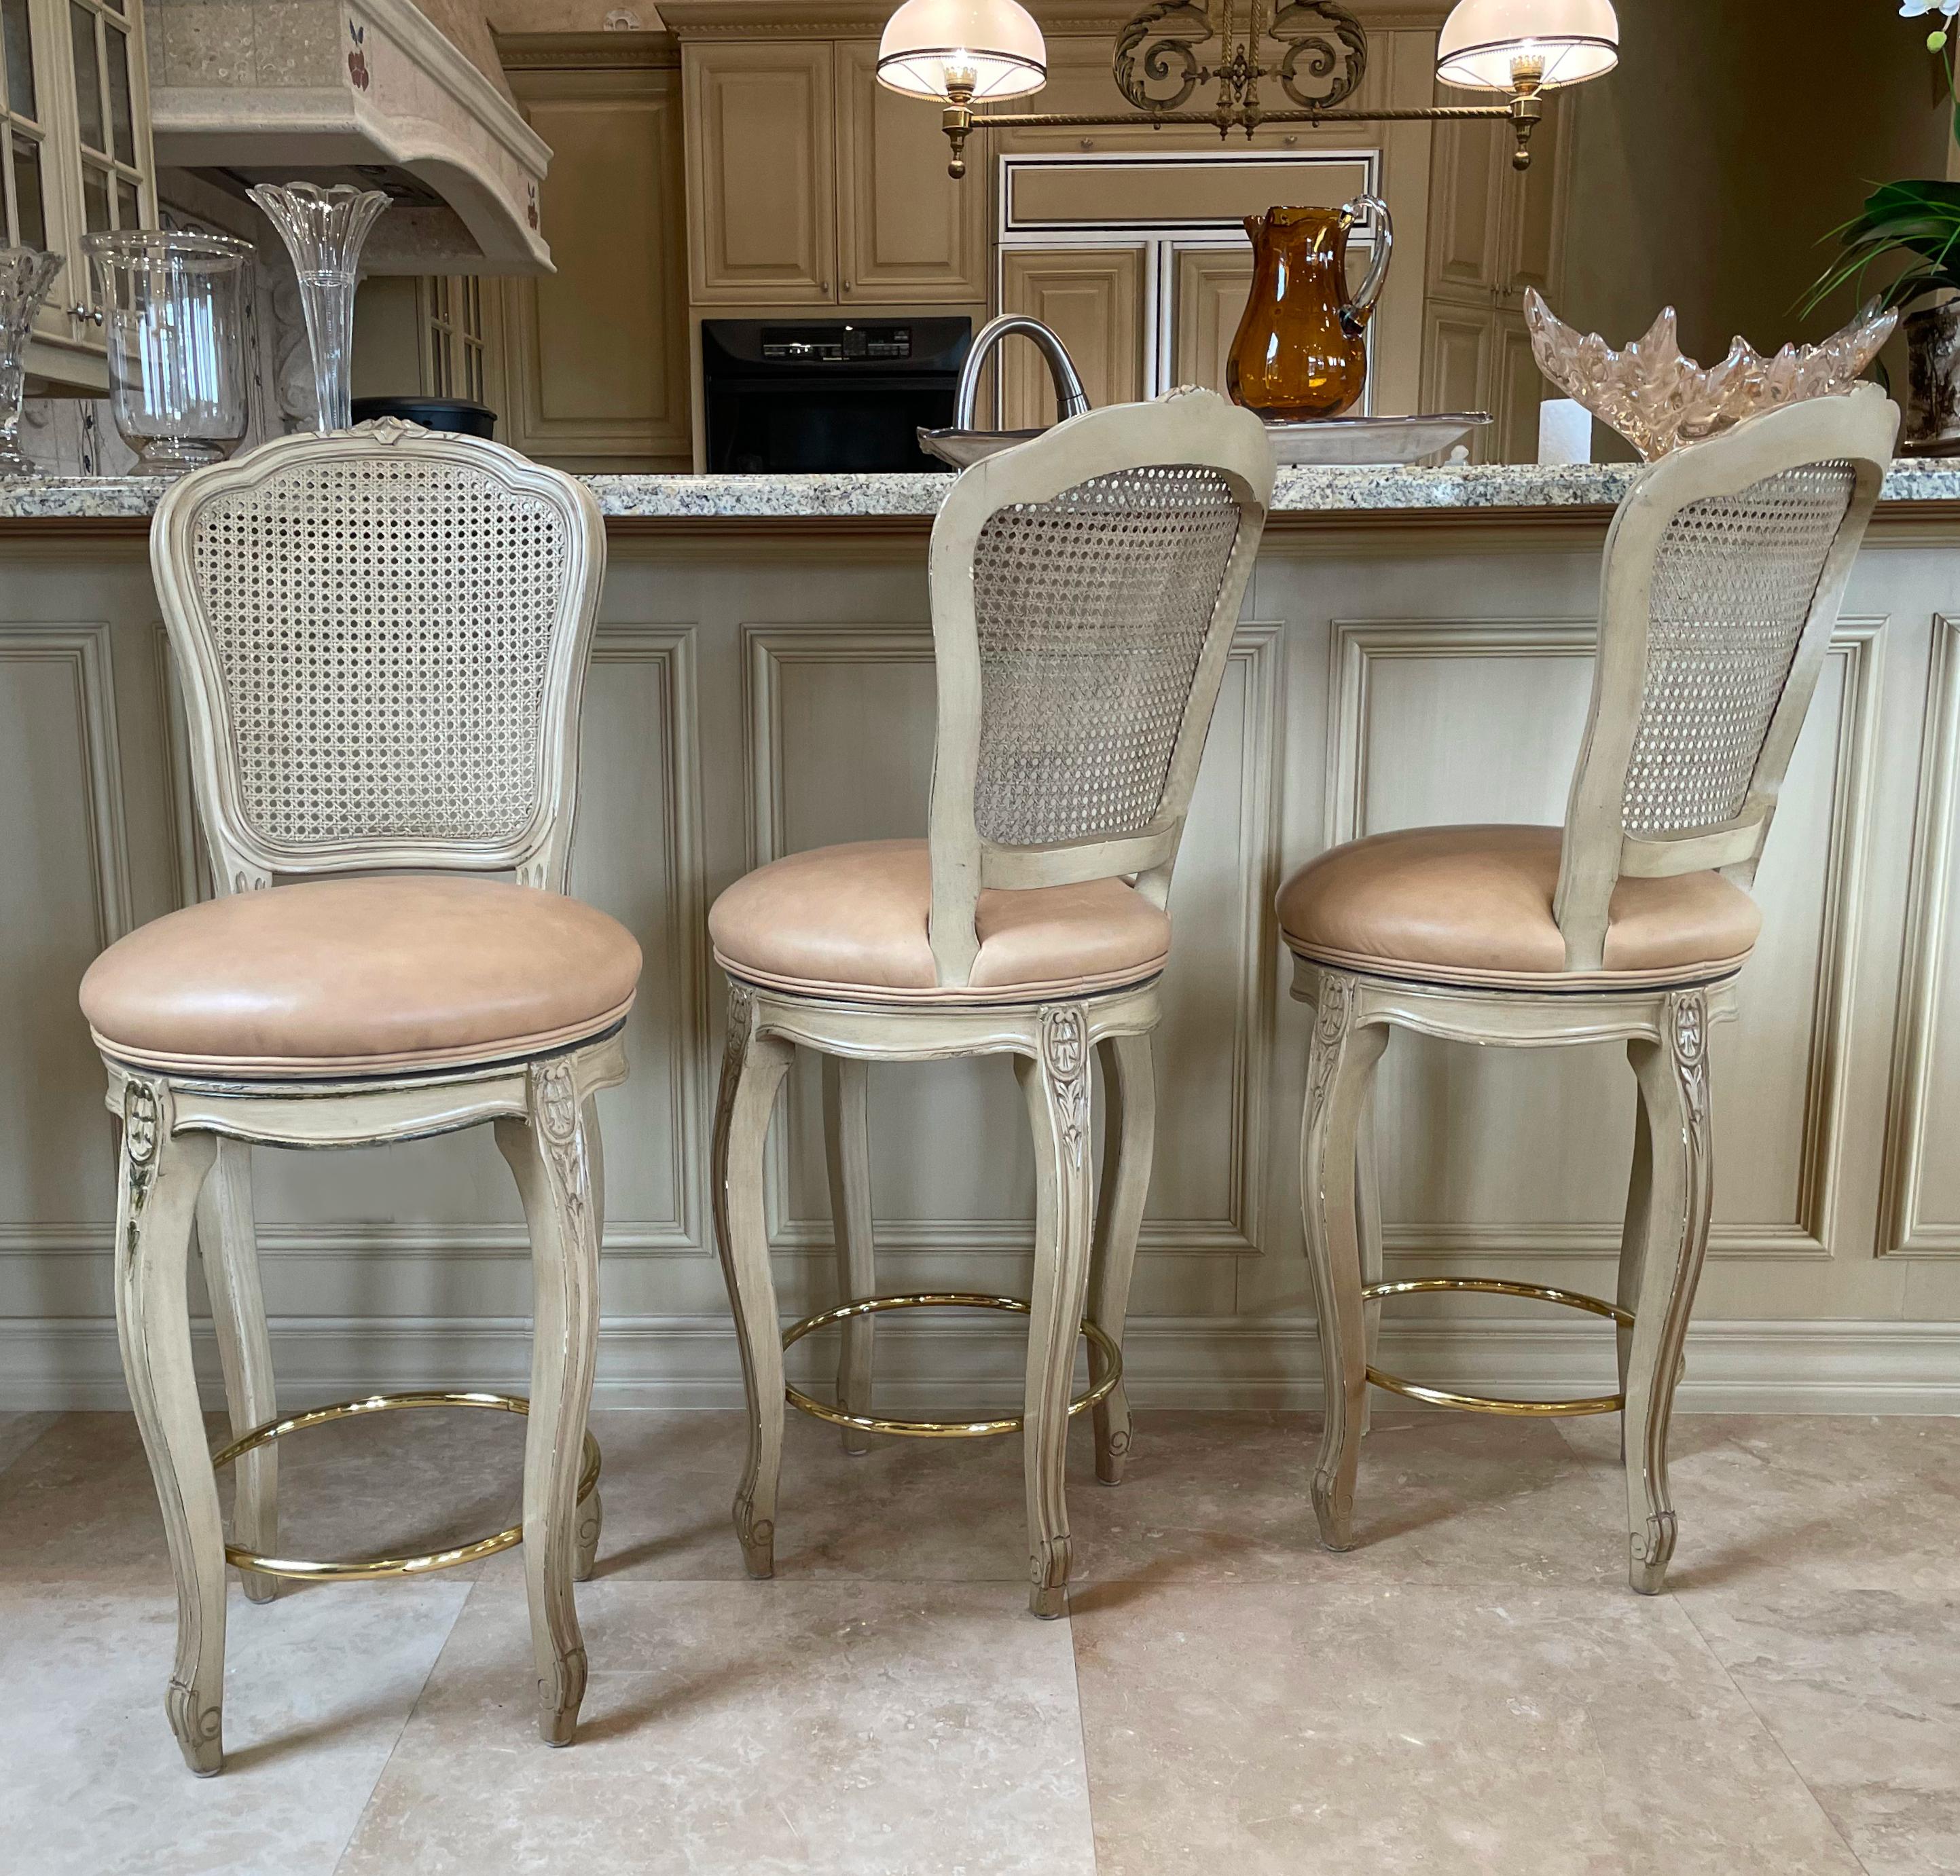 
Three Traditional Cane-Back Counter Chairs, Each in a Louis XV Style,
The cartouche-shaped back, leather-upholstered circular seats, on cabriole legs, joined by brass stretchers. 
Height back to floor 46 in. (116.84 cm.), Height seat to floor 29